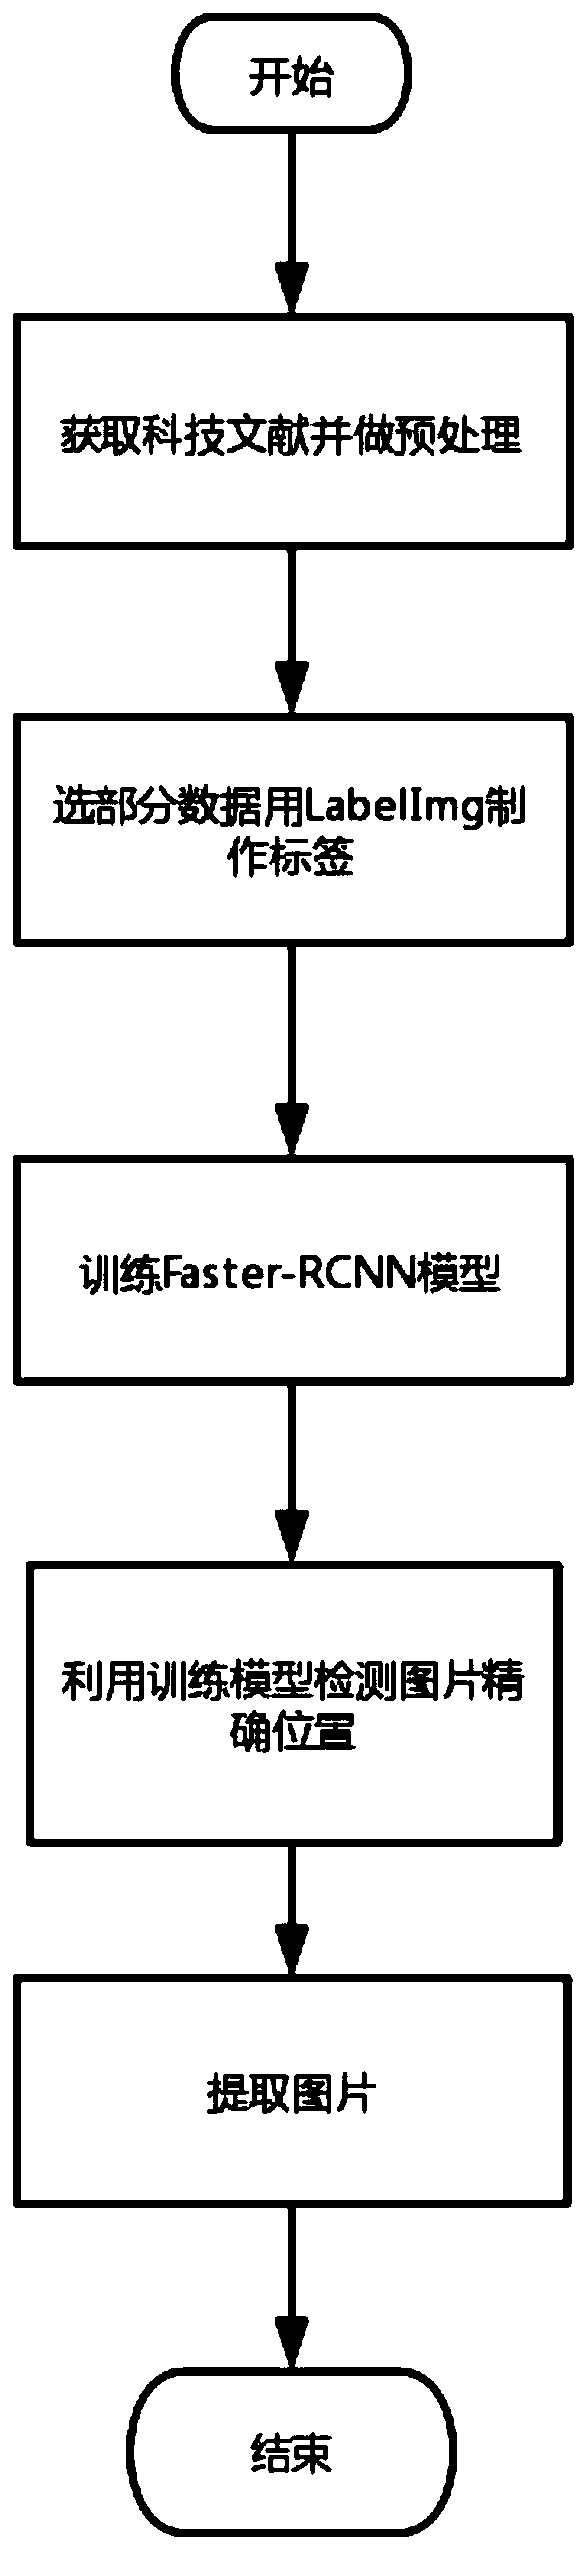 Scientific and technical literature picture extraction method based on Faster-RCNN